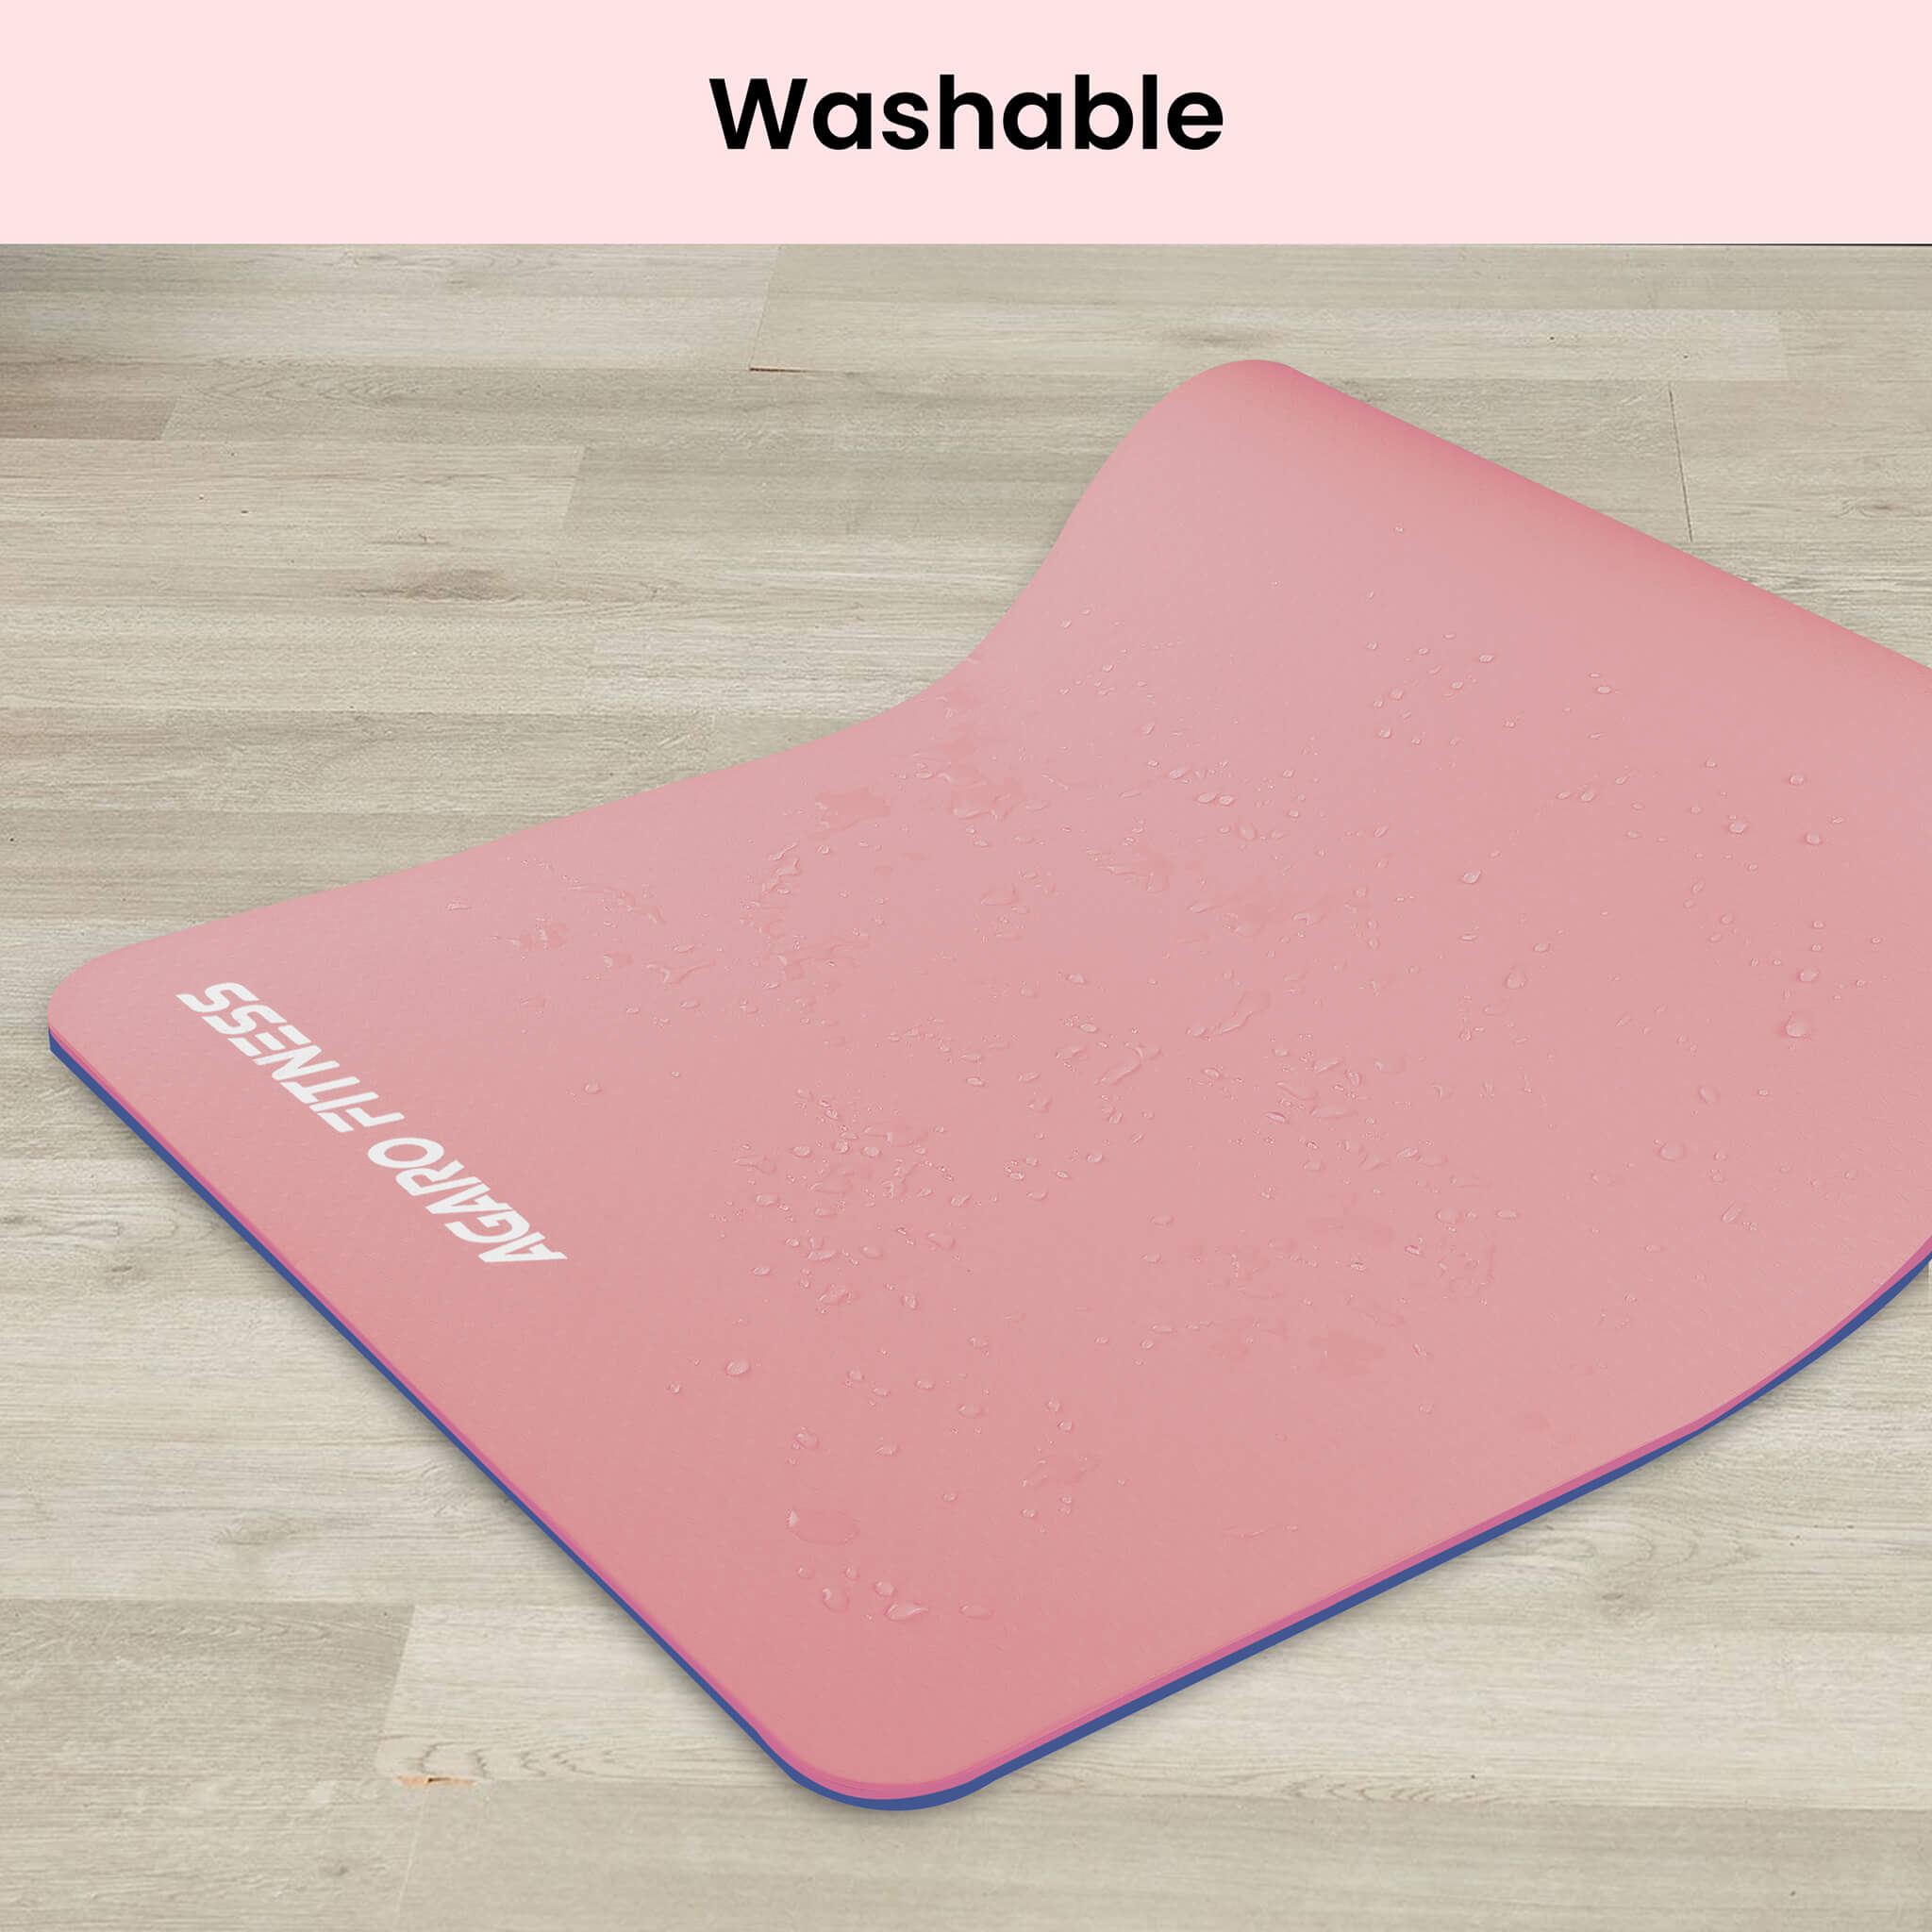  Pink Tween Adult Yoga Mat - Phresh Chi Mat & How-To Poster -  Exercise Game – Easy to Learn, Makes Yoga Fun - Helps Alignment,  Flexibility, Weight-loss, Mindfulness - Great for